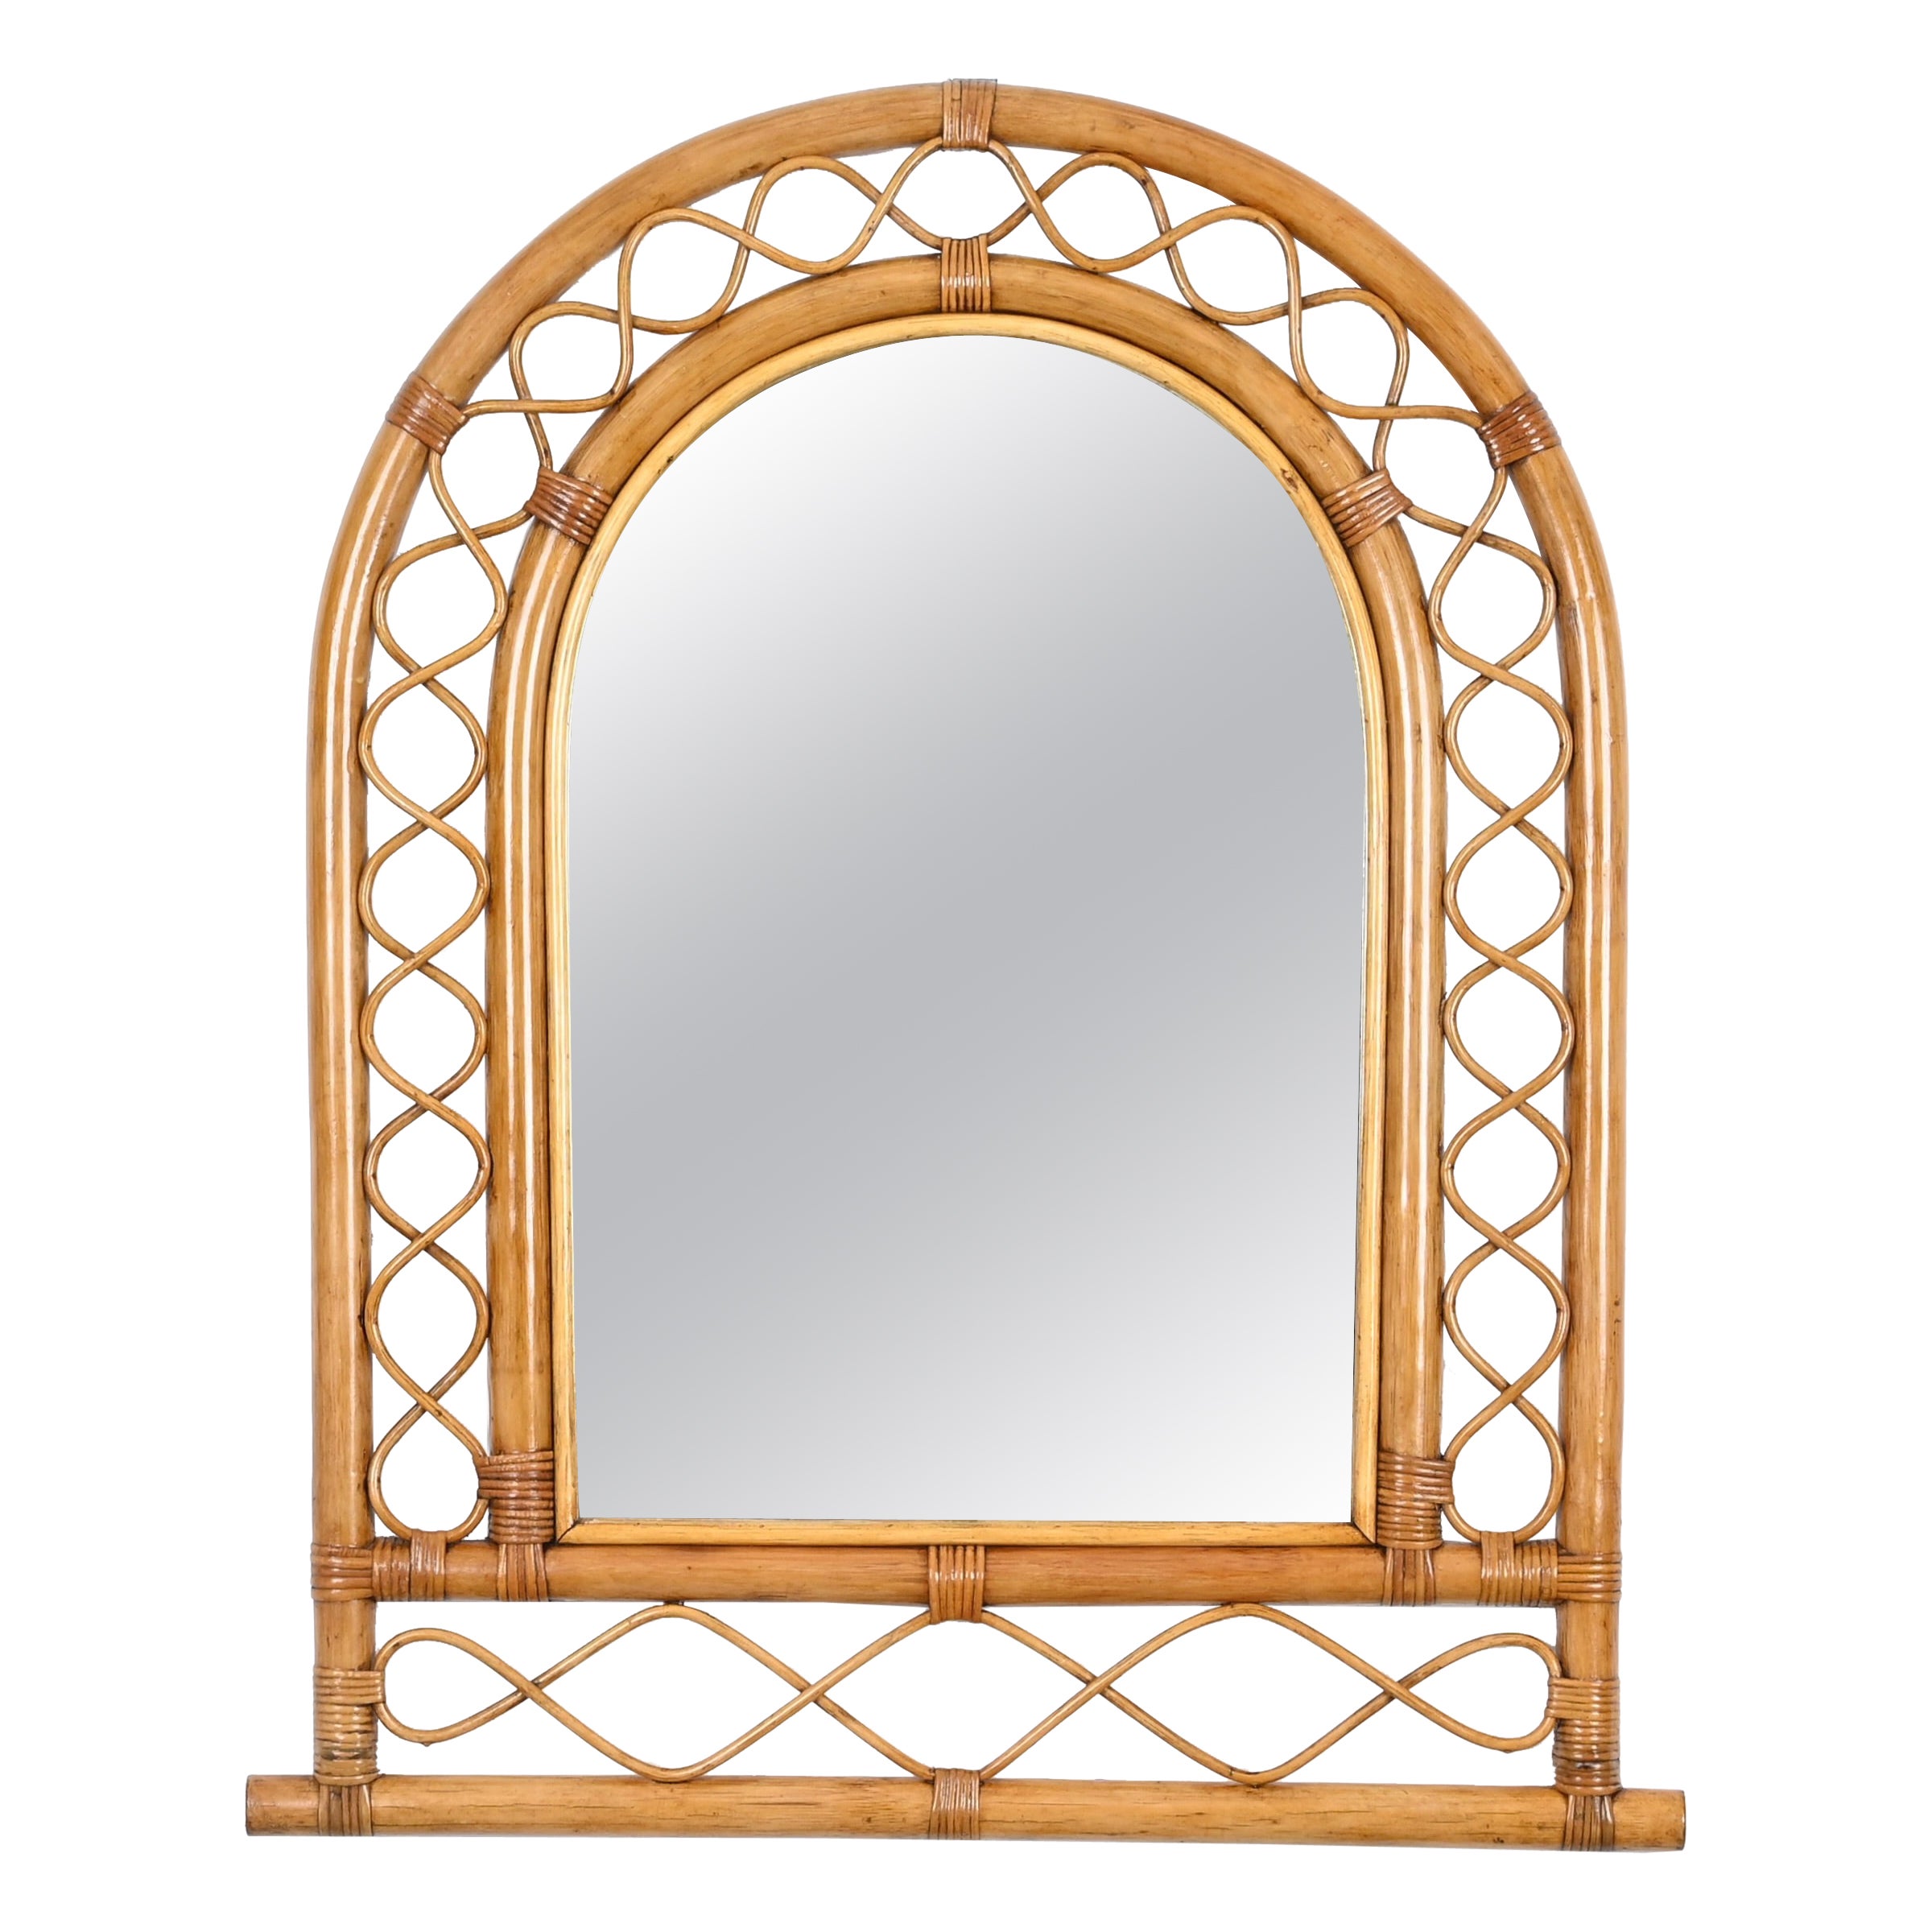 French Riviera Arch Mirror in Rattan, Wicker and Bamboo, Italy 1960s